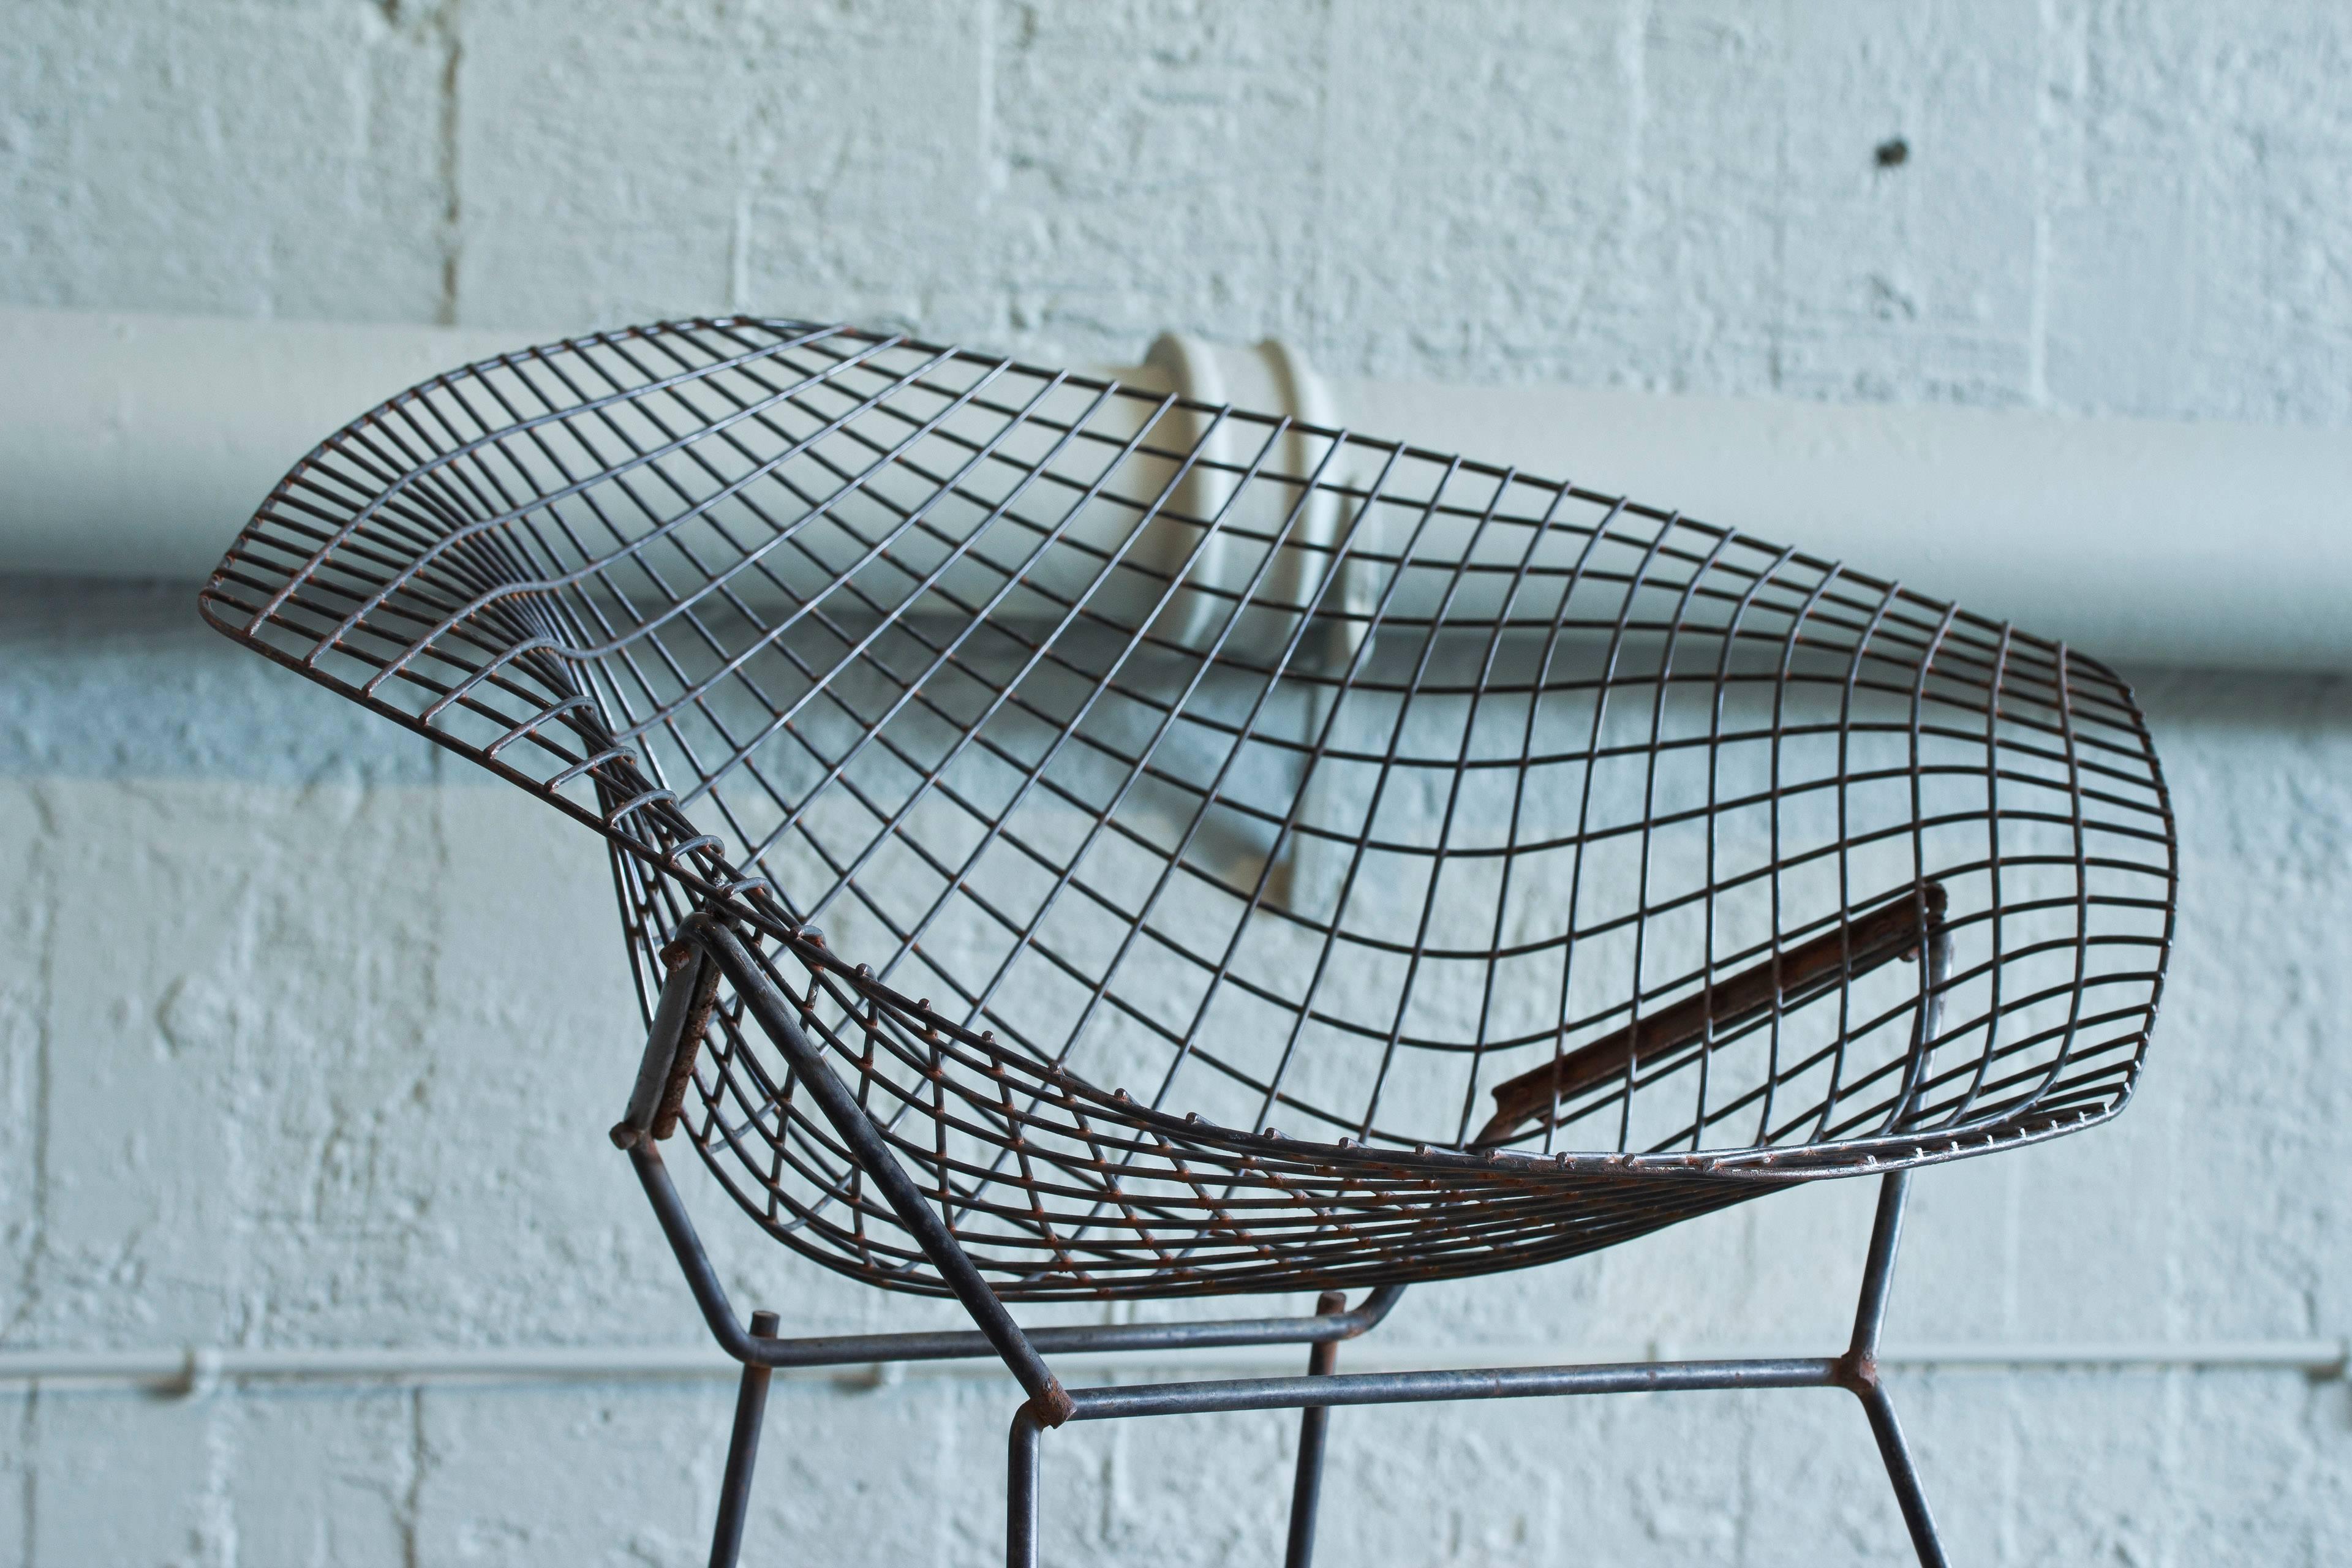 Diamond easy chair designed by Harry Bertoia. Produced by Knoll, USA.